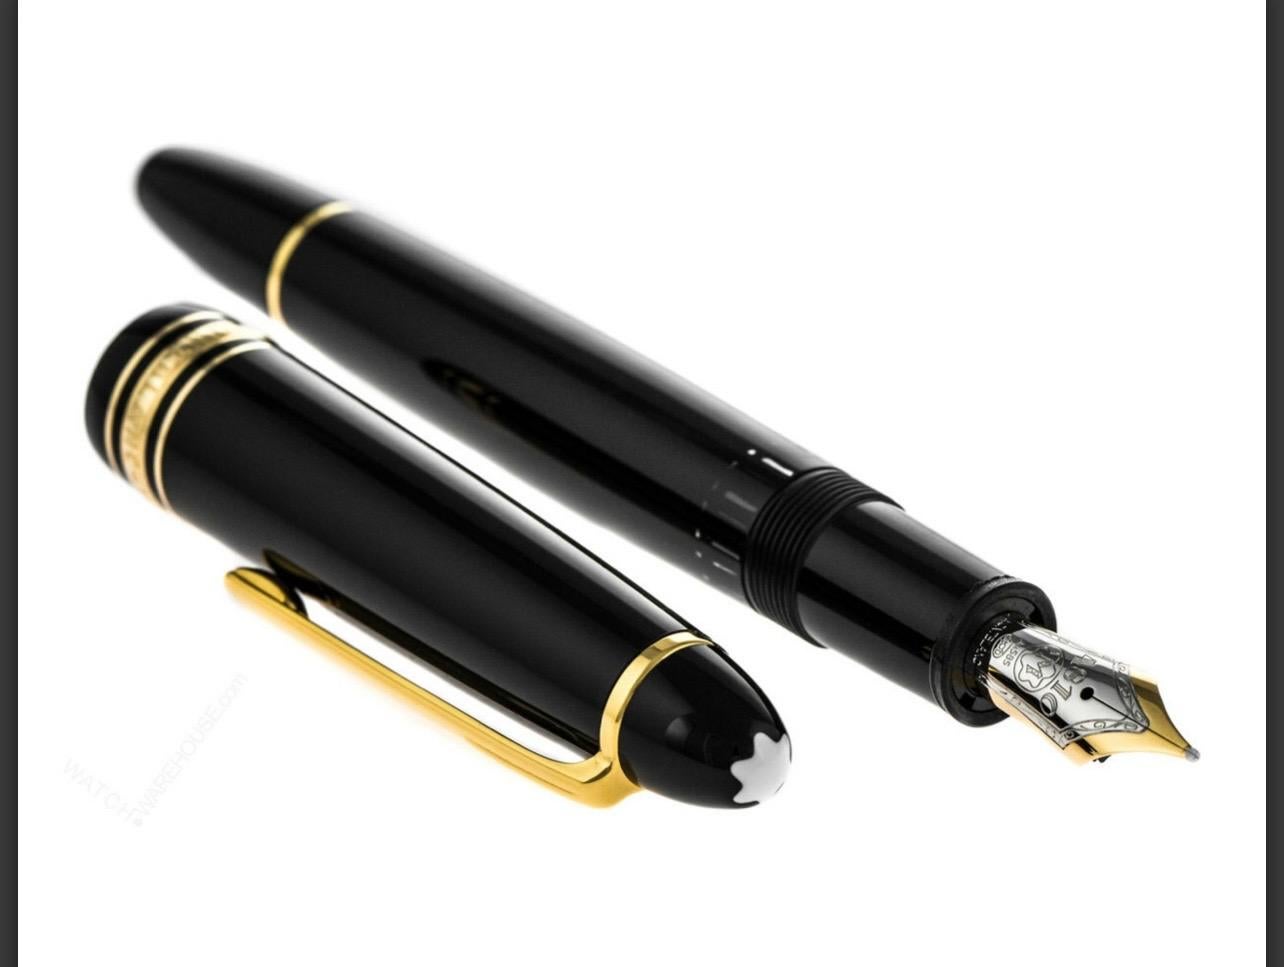 
The  Meisterstuck LeGrand in deep black Precious Resin  with gold coated details and surmounted by the white star emblem evolves into Montblanc's
design icon
Features 
Description
Montblanc Meisterstuck black resin and gold-plated fountain pen.
I